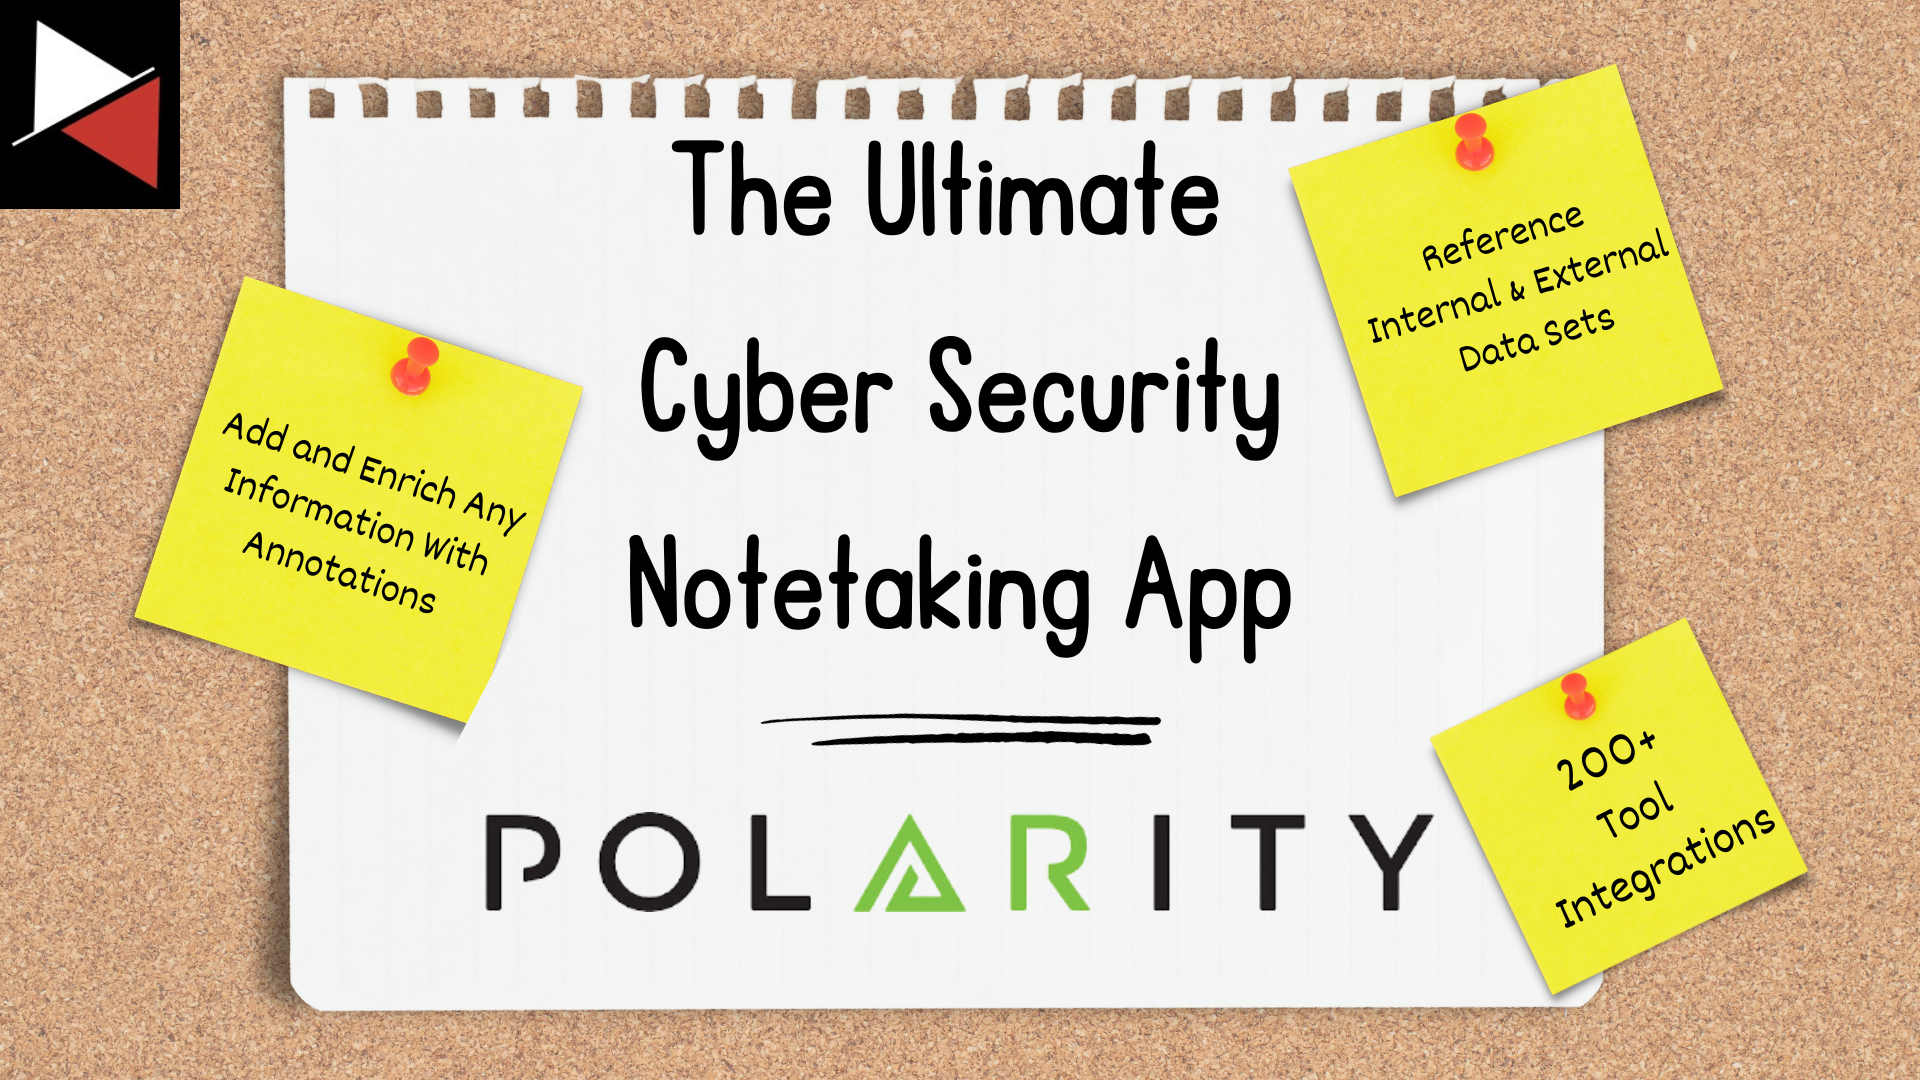 The Ultimate Cyber Security Notetaking App